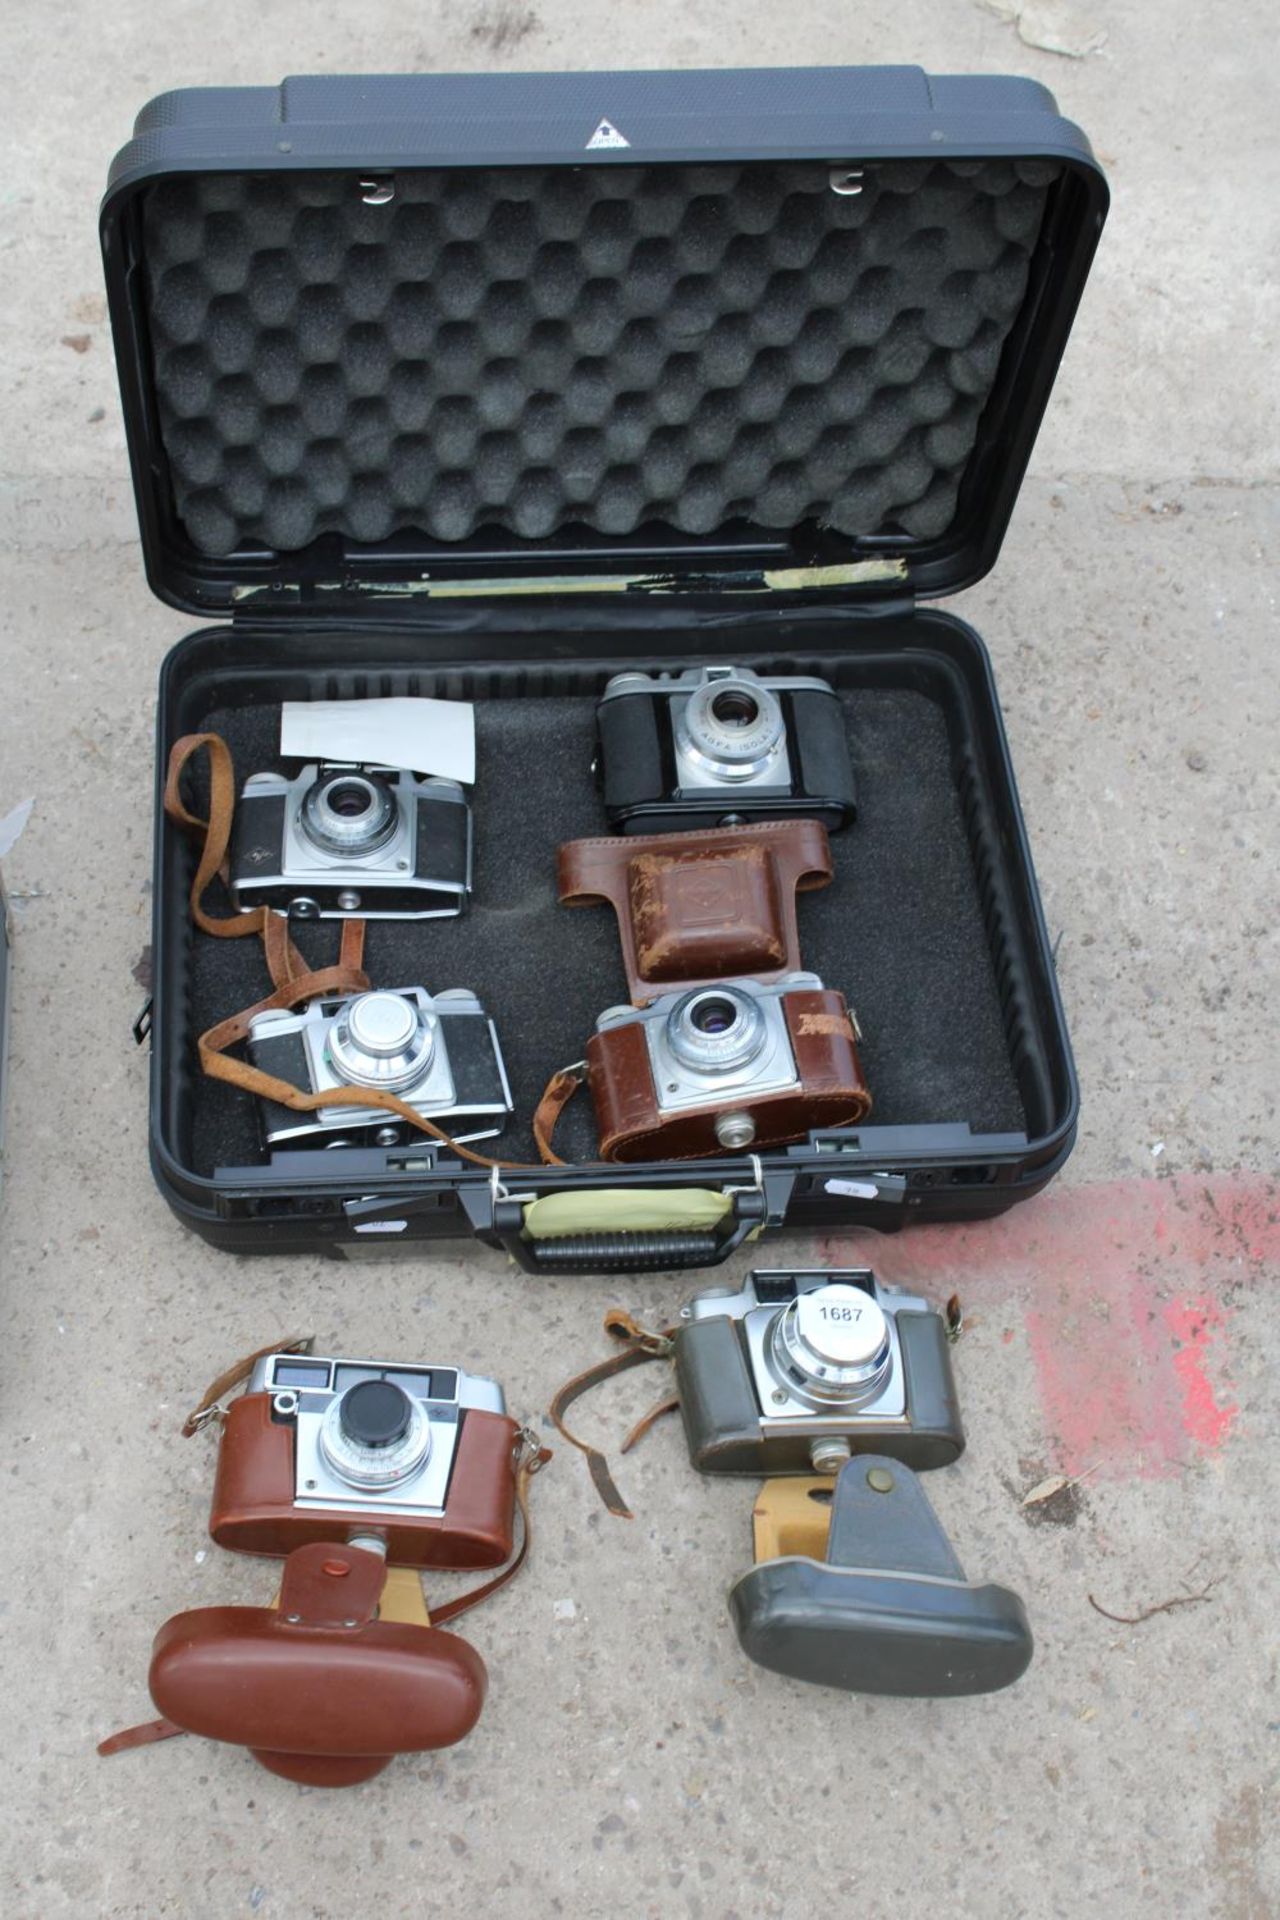 SIX VARIOUS AGFA CAMERAS IN A HARD CARRY CASE